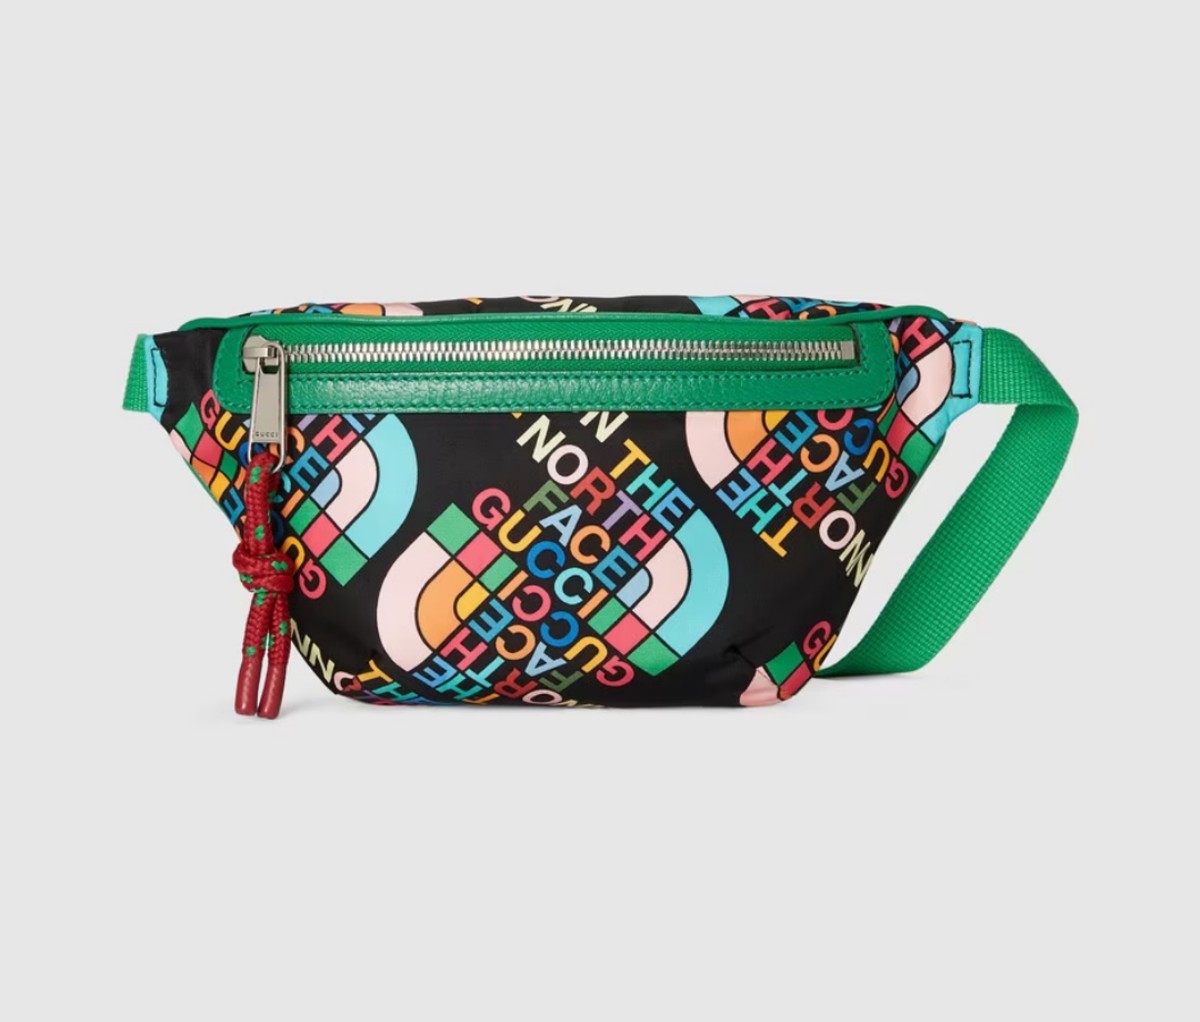 The North Face x Gucci Chapter 3 Is Here - PurseBlog